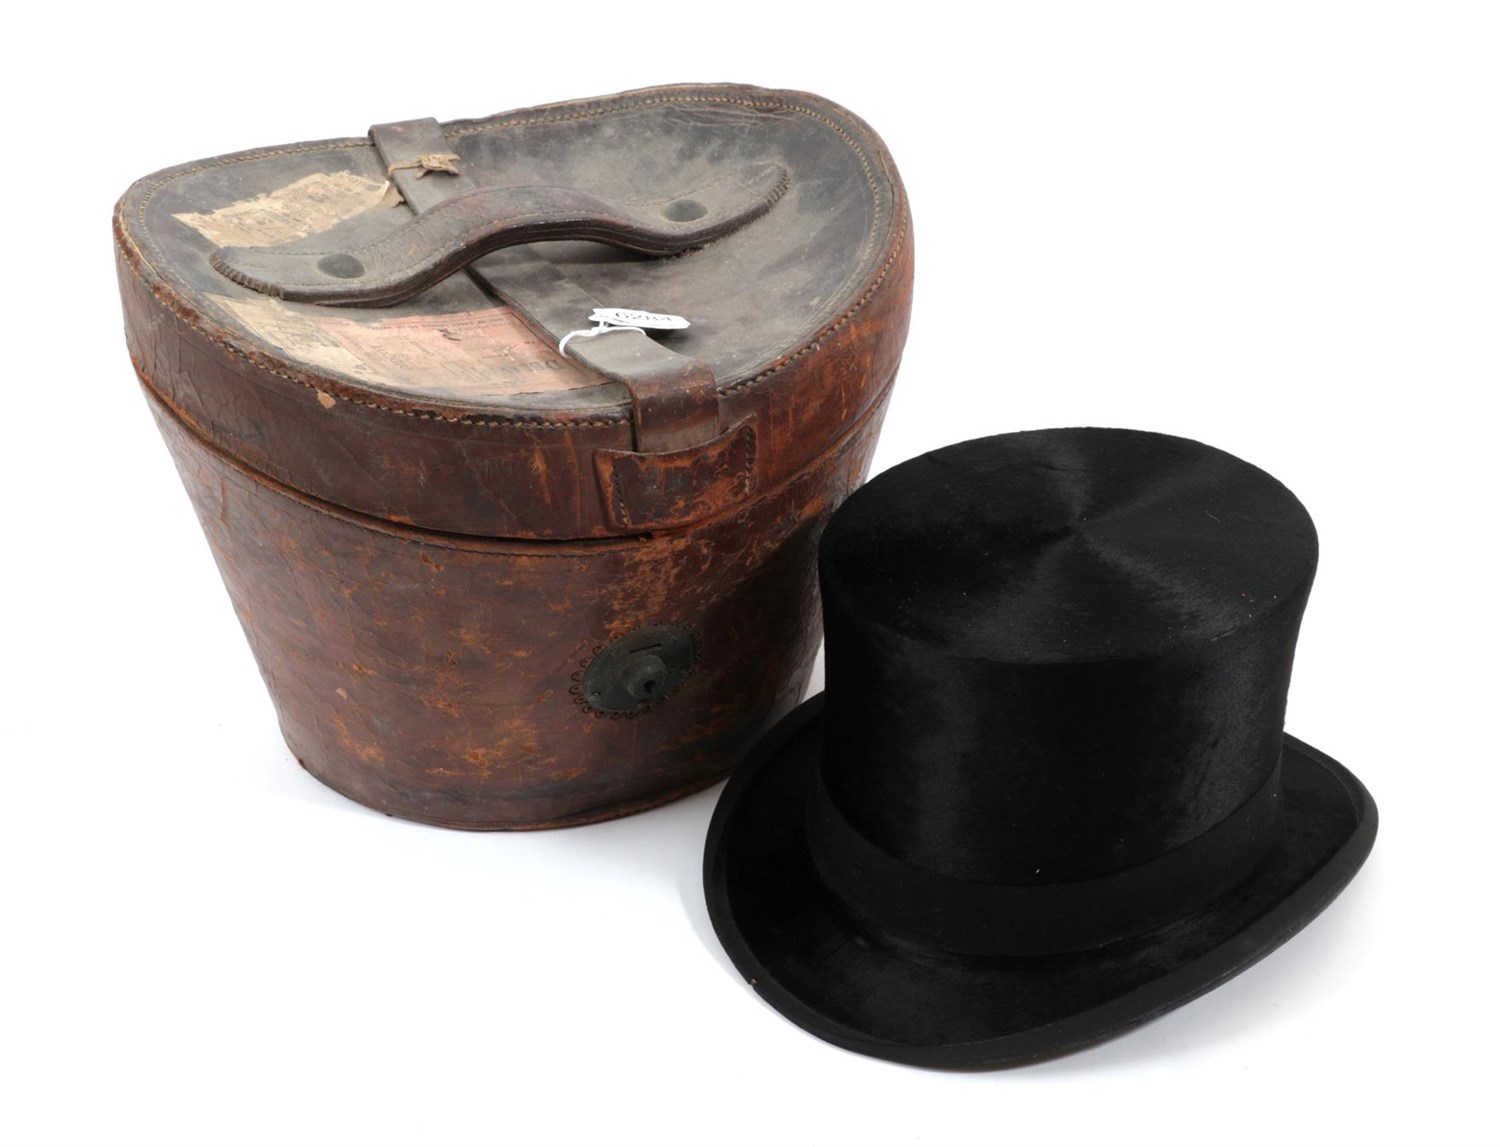 Lot 6284 - W English, Pall Mall Black Silk Top Hat, initialled 'JR', in a brown leather hat case with dark red